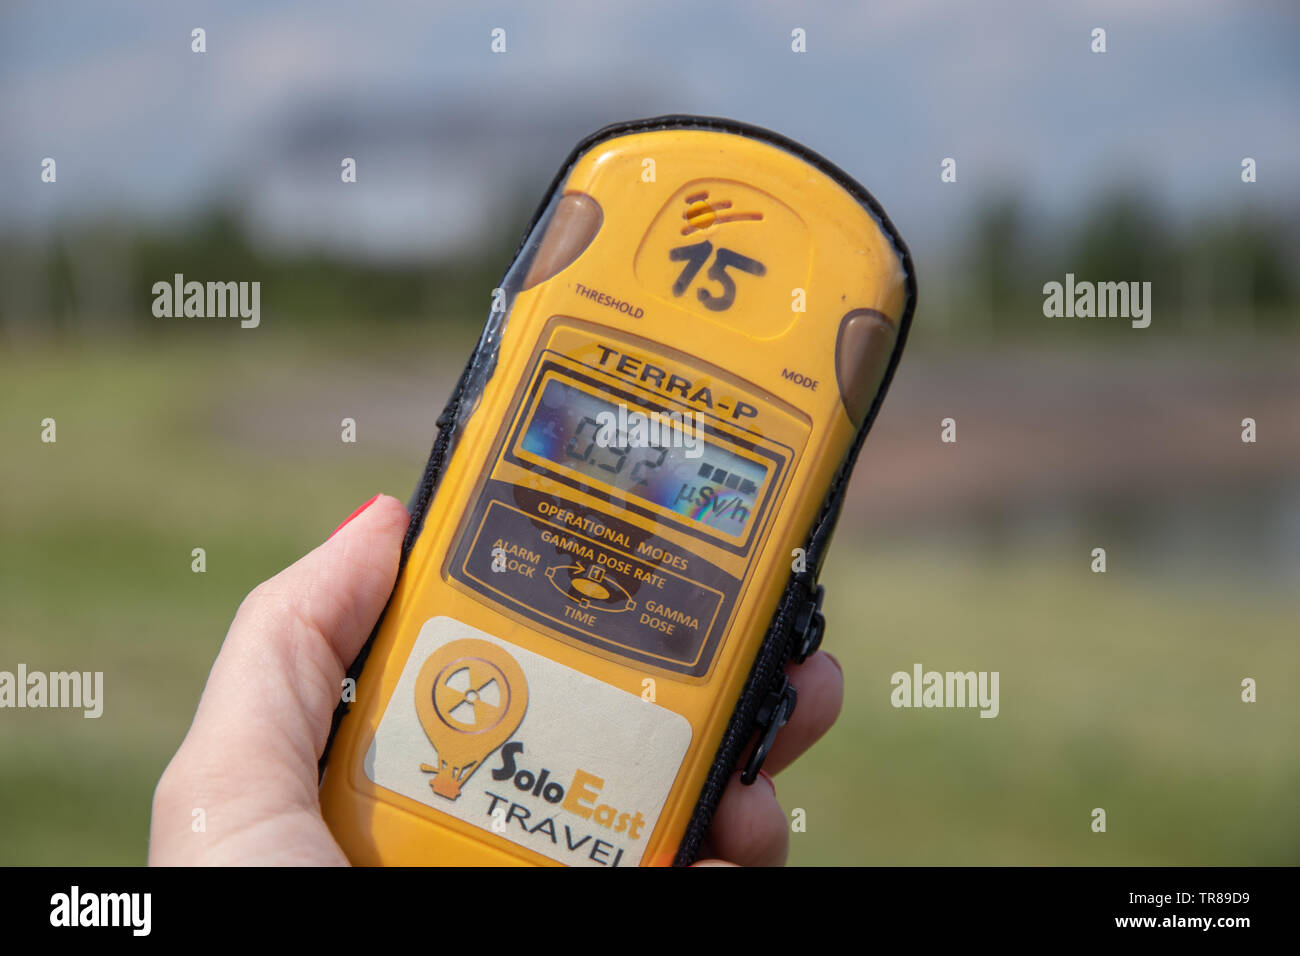 May 2019 – Geiger counter at Chernobyl Nuclear Power Plant, Reactor 4, Chernobyl exclusion zone, Ukraine Stock Photo